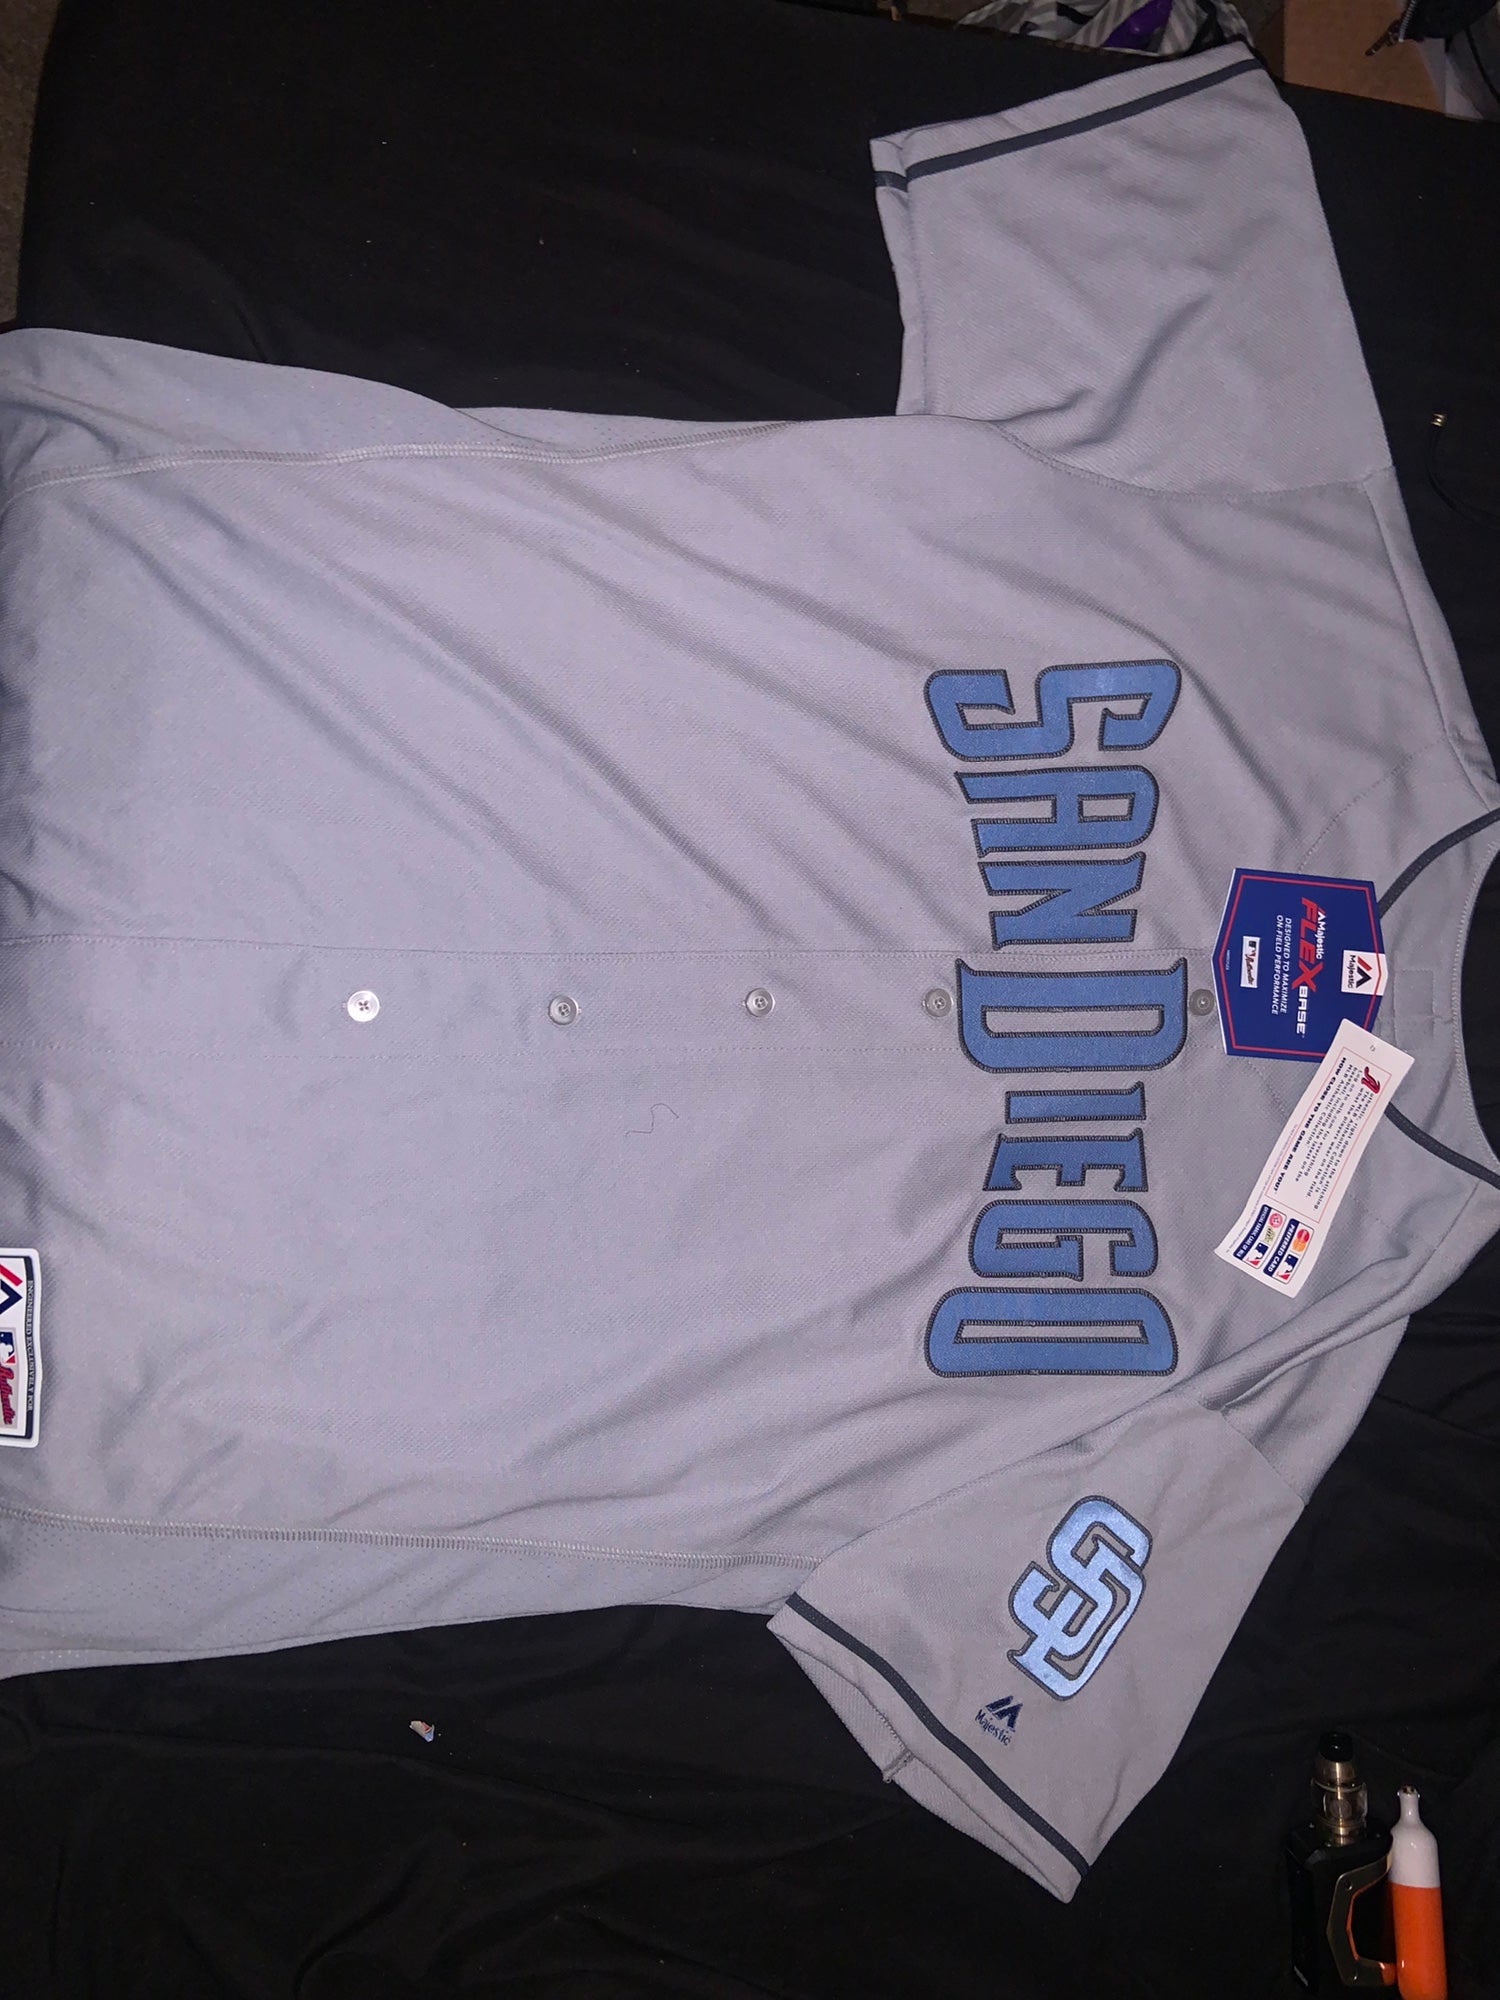 San Diego Padres Father's Day jersey